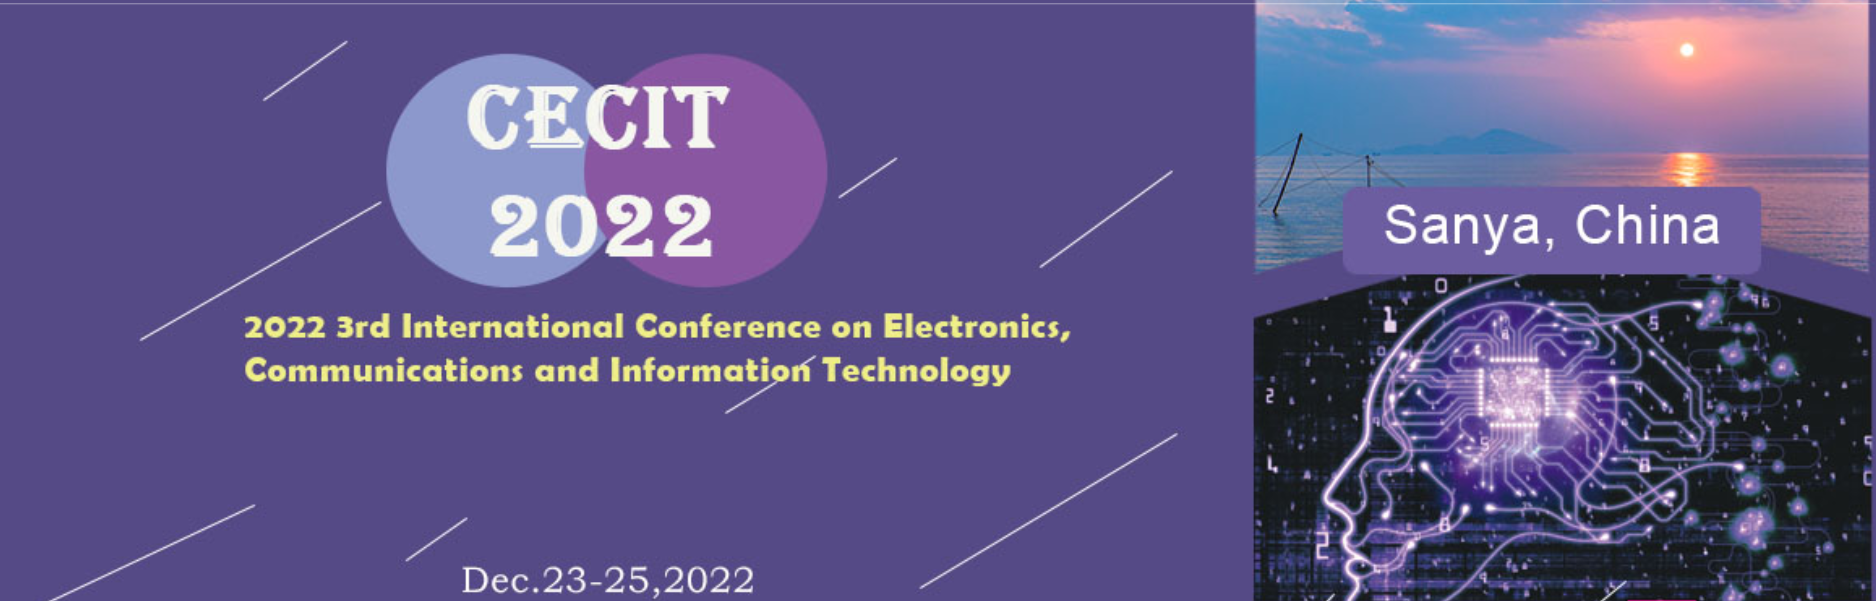 2022 3rd International Conference on Electronics, Communications and Information Technology CECIT 2022